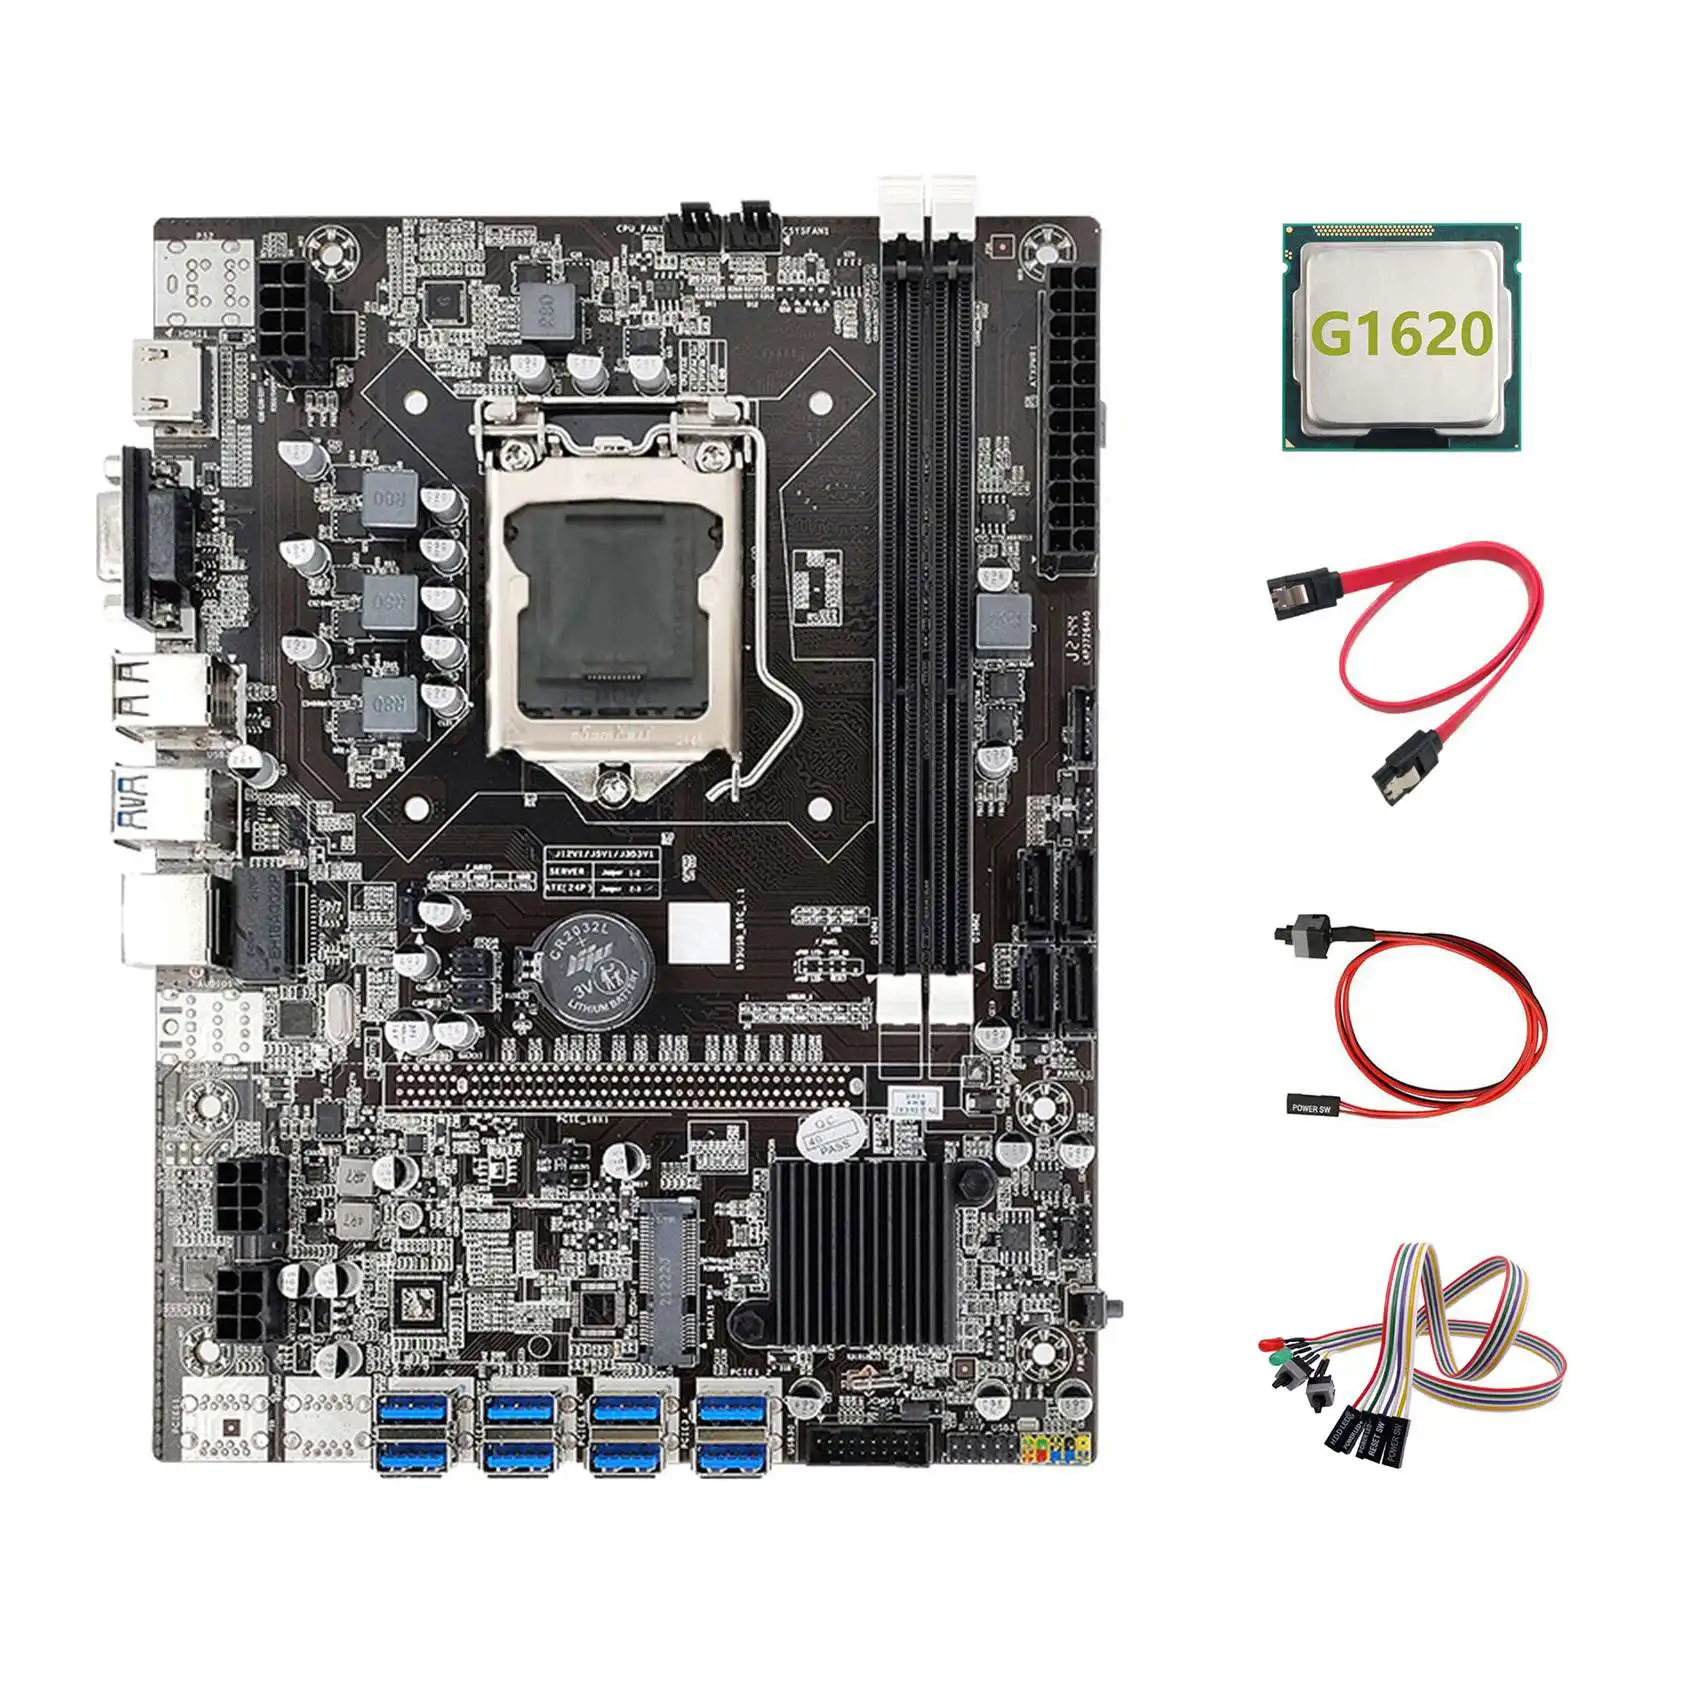 B75 BTC Mining Motherboard 8XUSB LGA1155 Motherboard with G1620 CPU+SATA Cable+Switch Cable+Switch Cable with Light